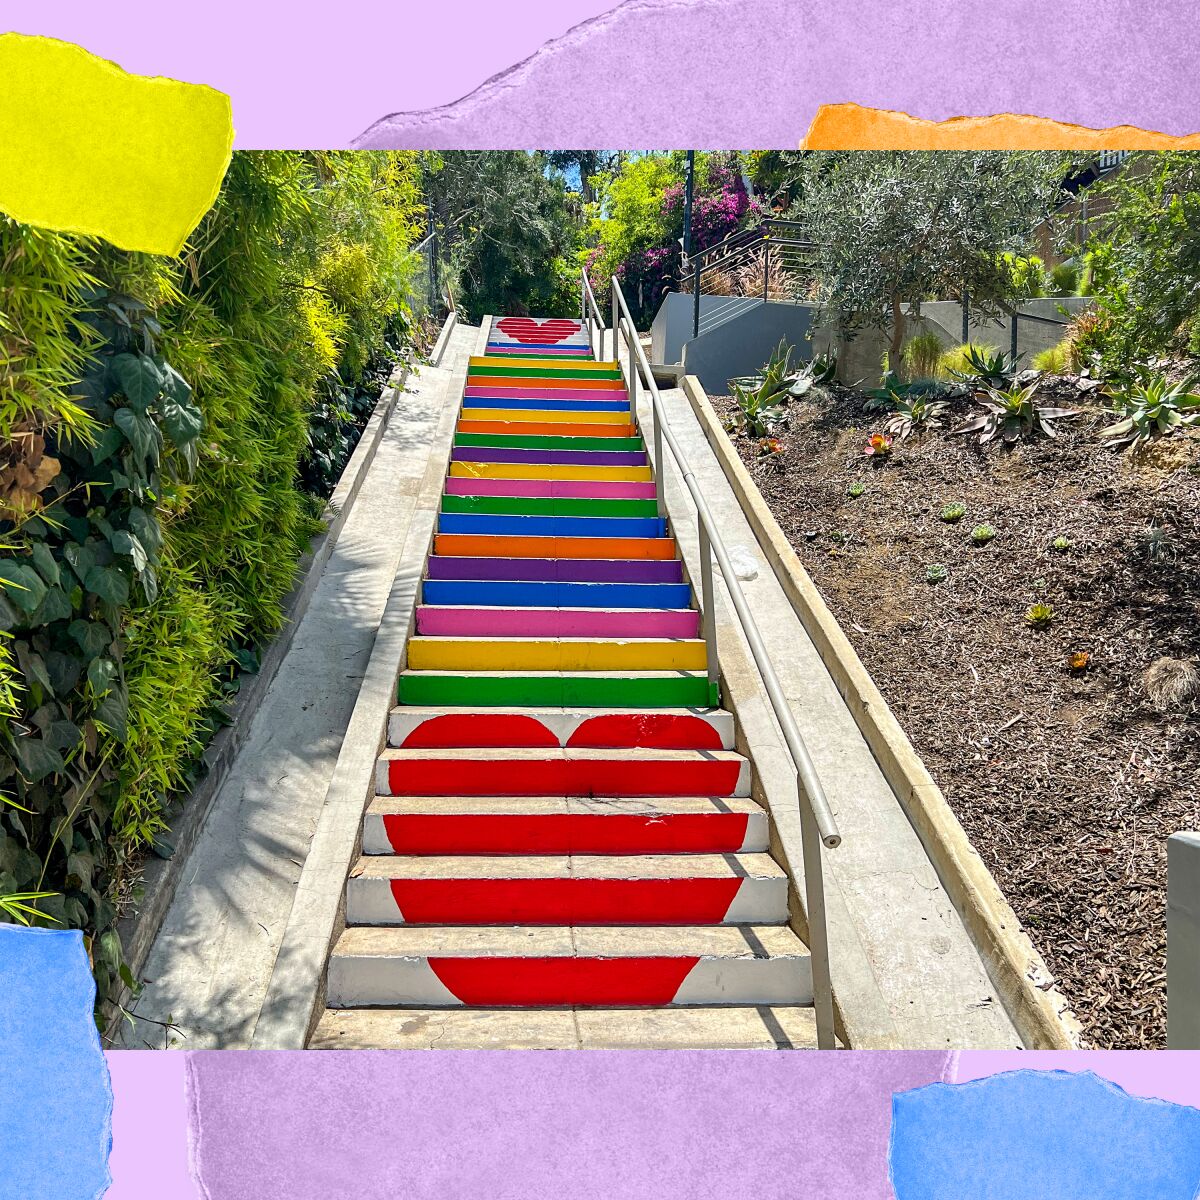 A set of outdoor concrete stairs that are painted with hearts and rainbow colors is seen from the bottom looking up.